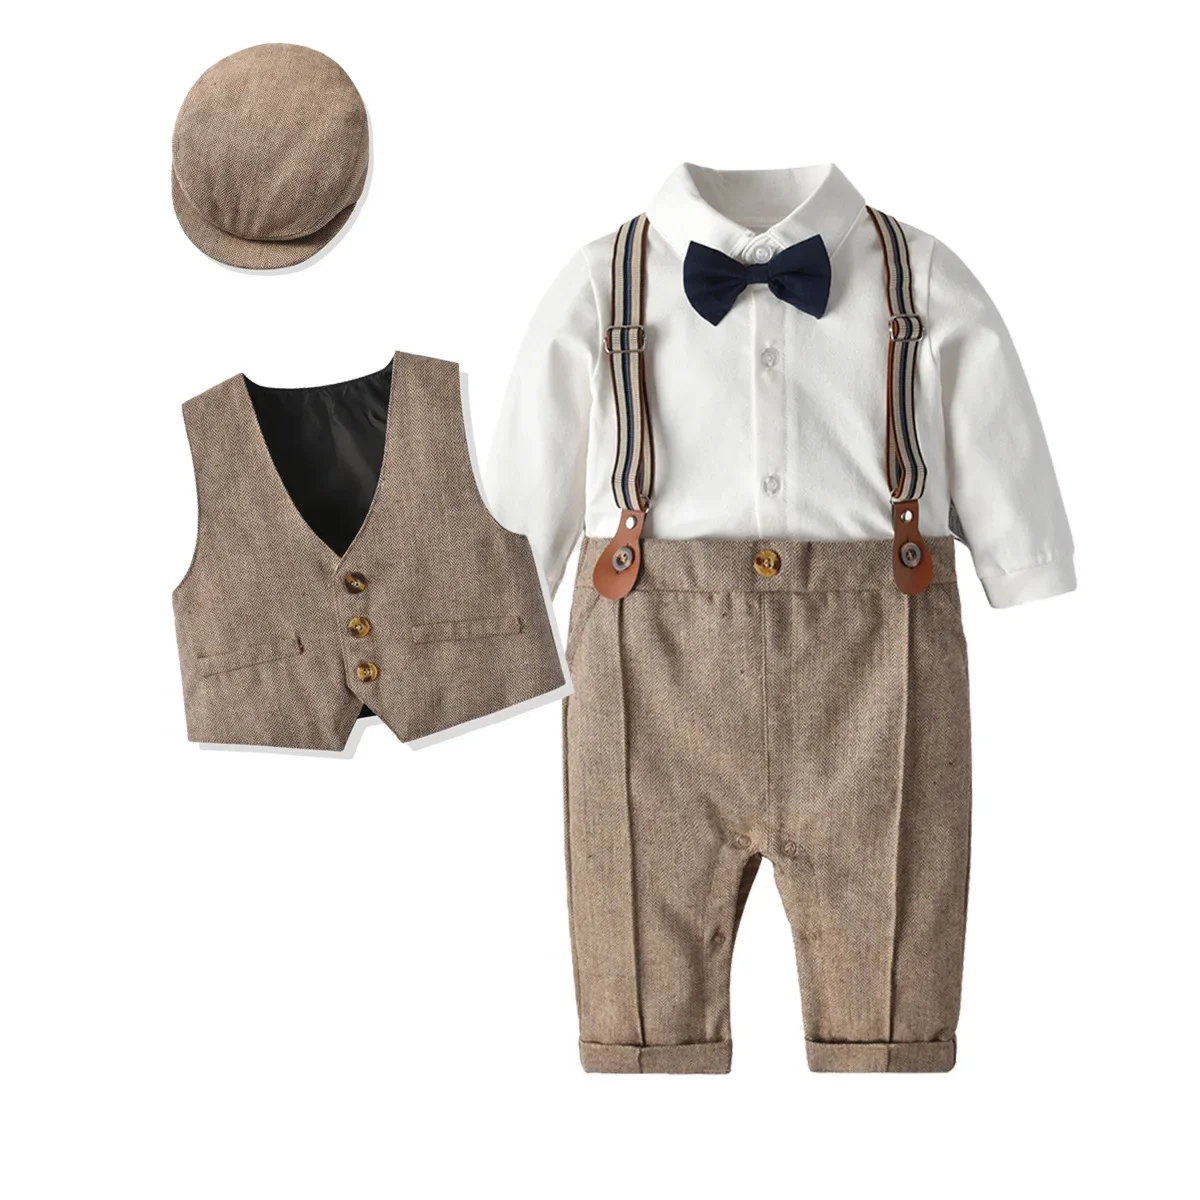 

Baby Clothes Boy Gentleman Suit Suspender Pants with Vest Cap Vintage Britain Set for First Birthday Wedding Photo Shoot